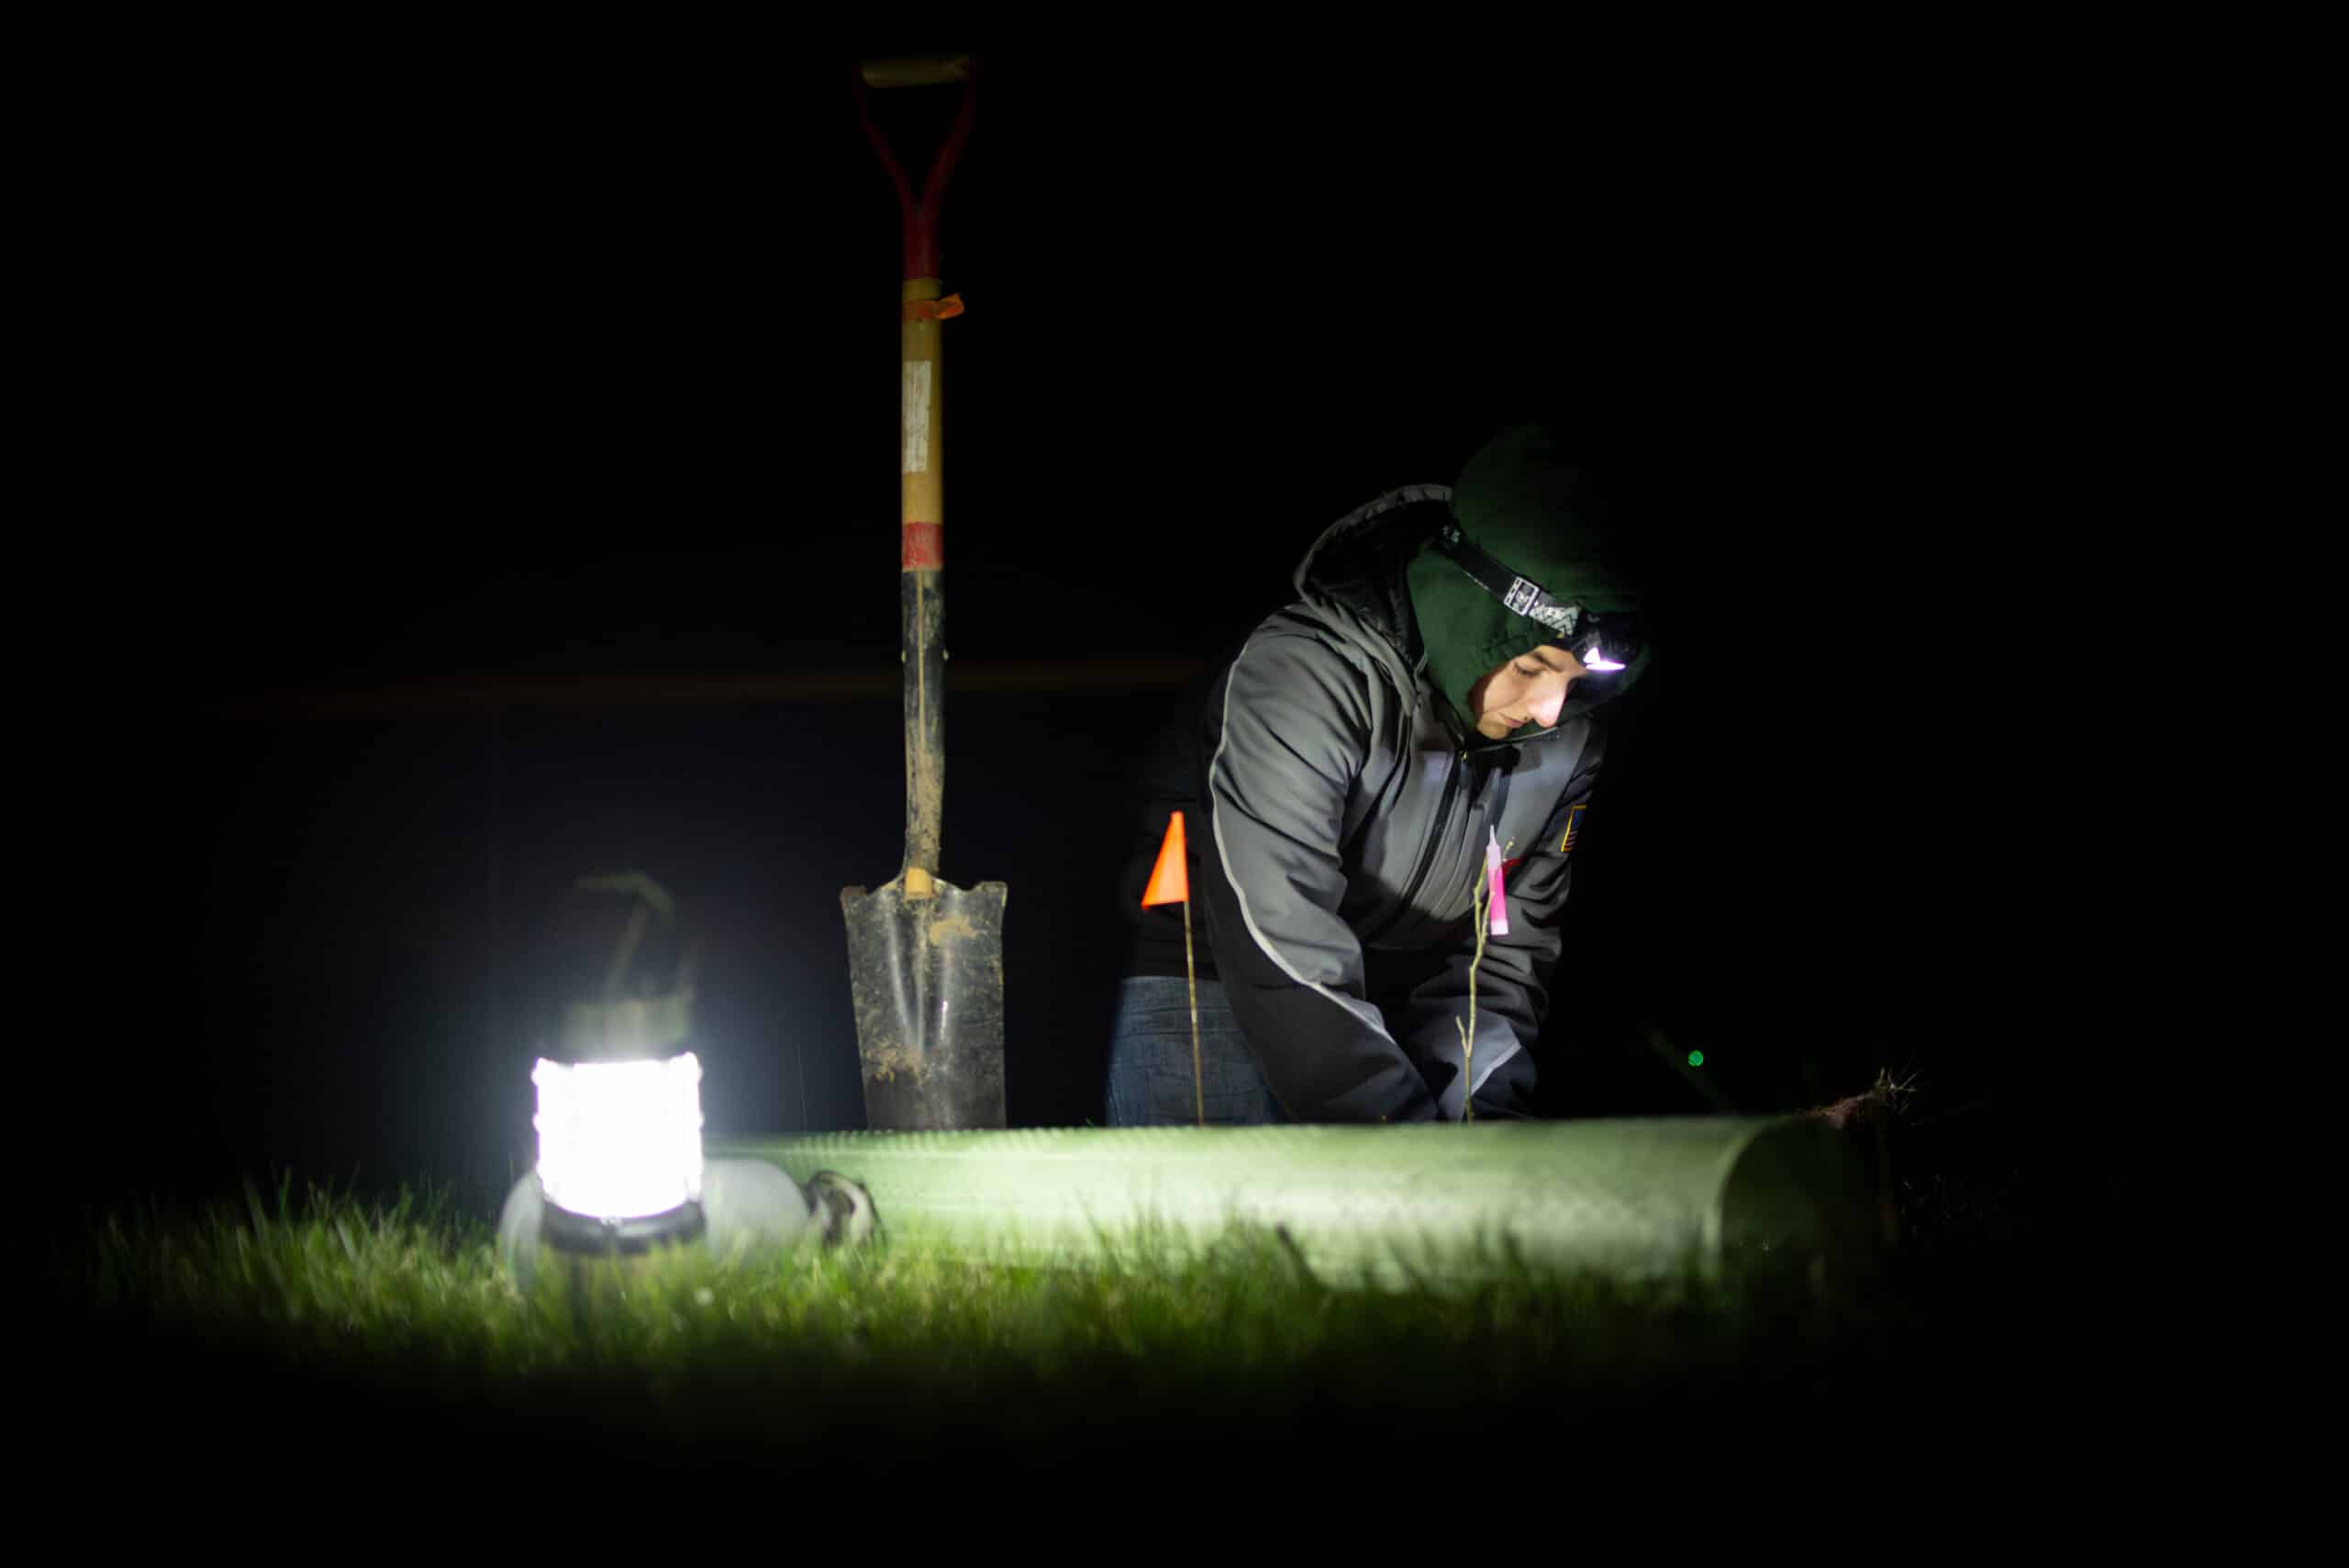 A person with a headlamp plants a tree seedling in a field